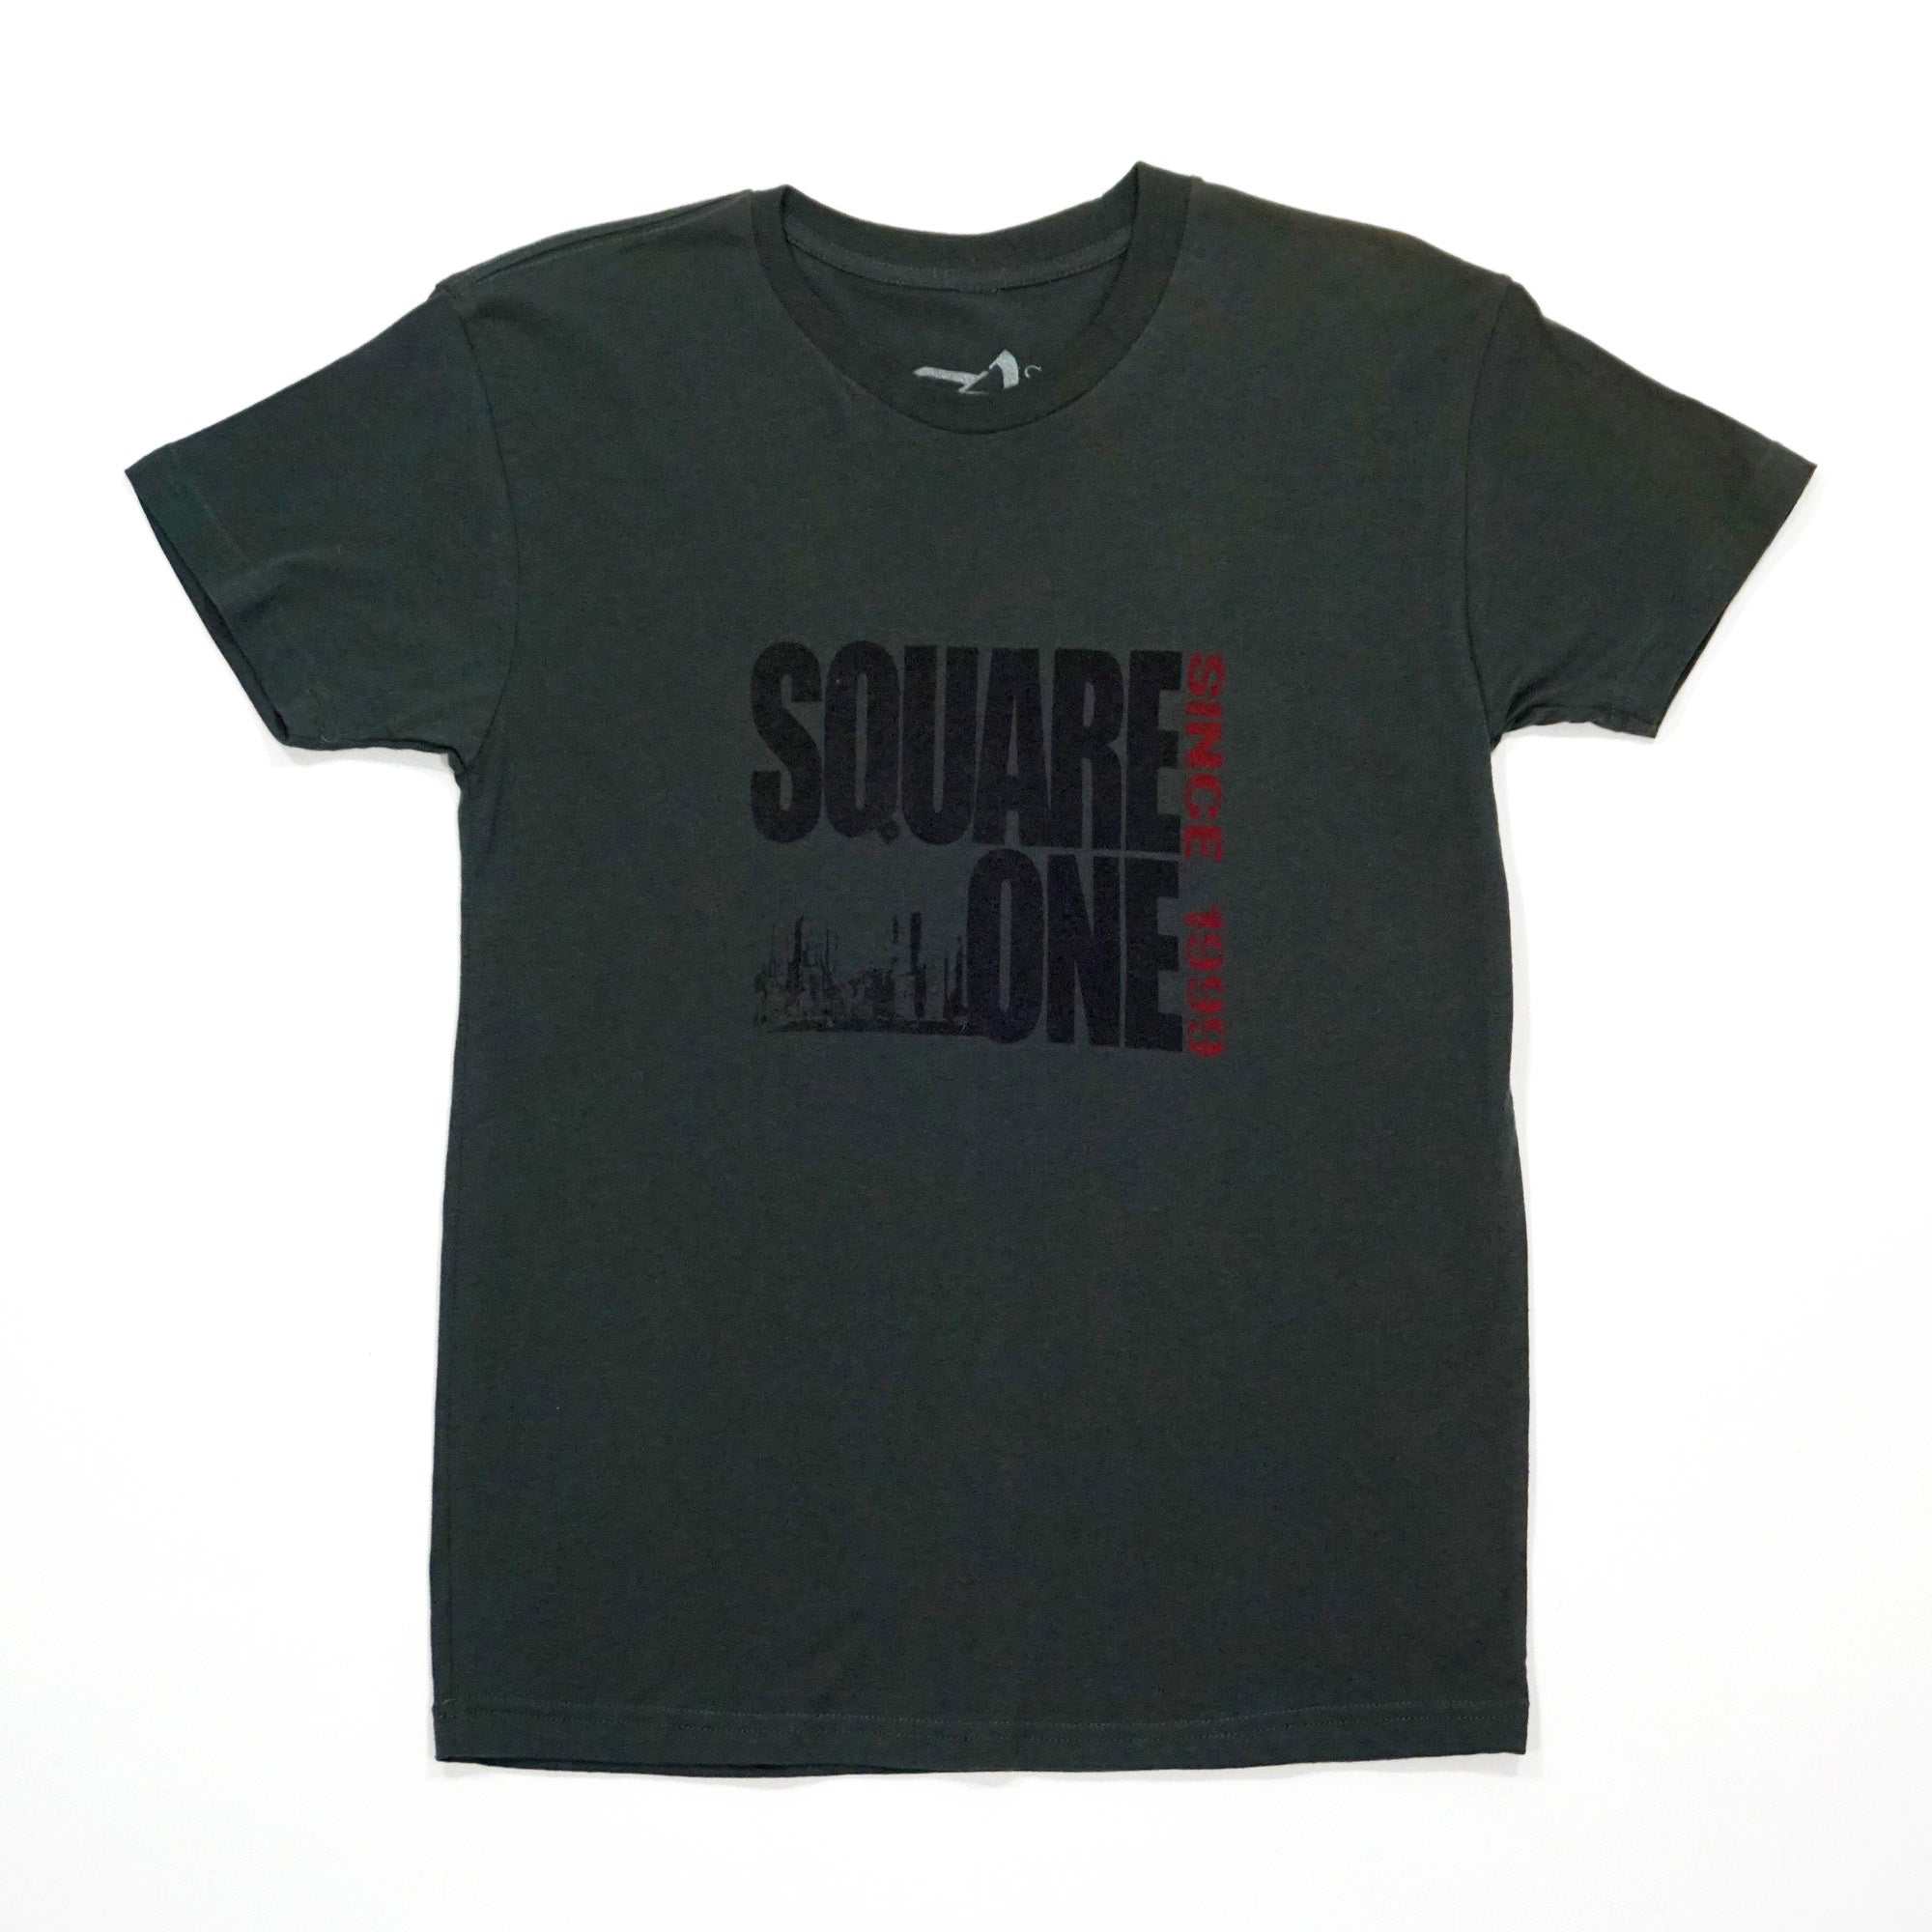 Square One Clothing - Since '99 Shirt (S)